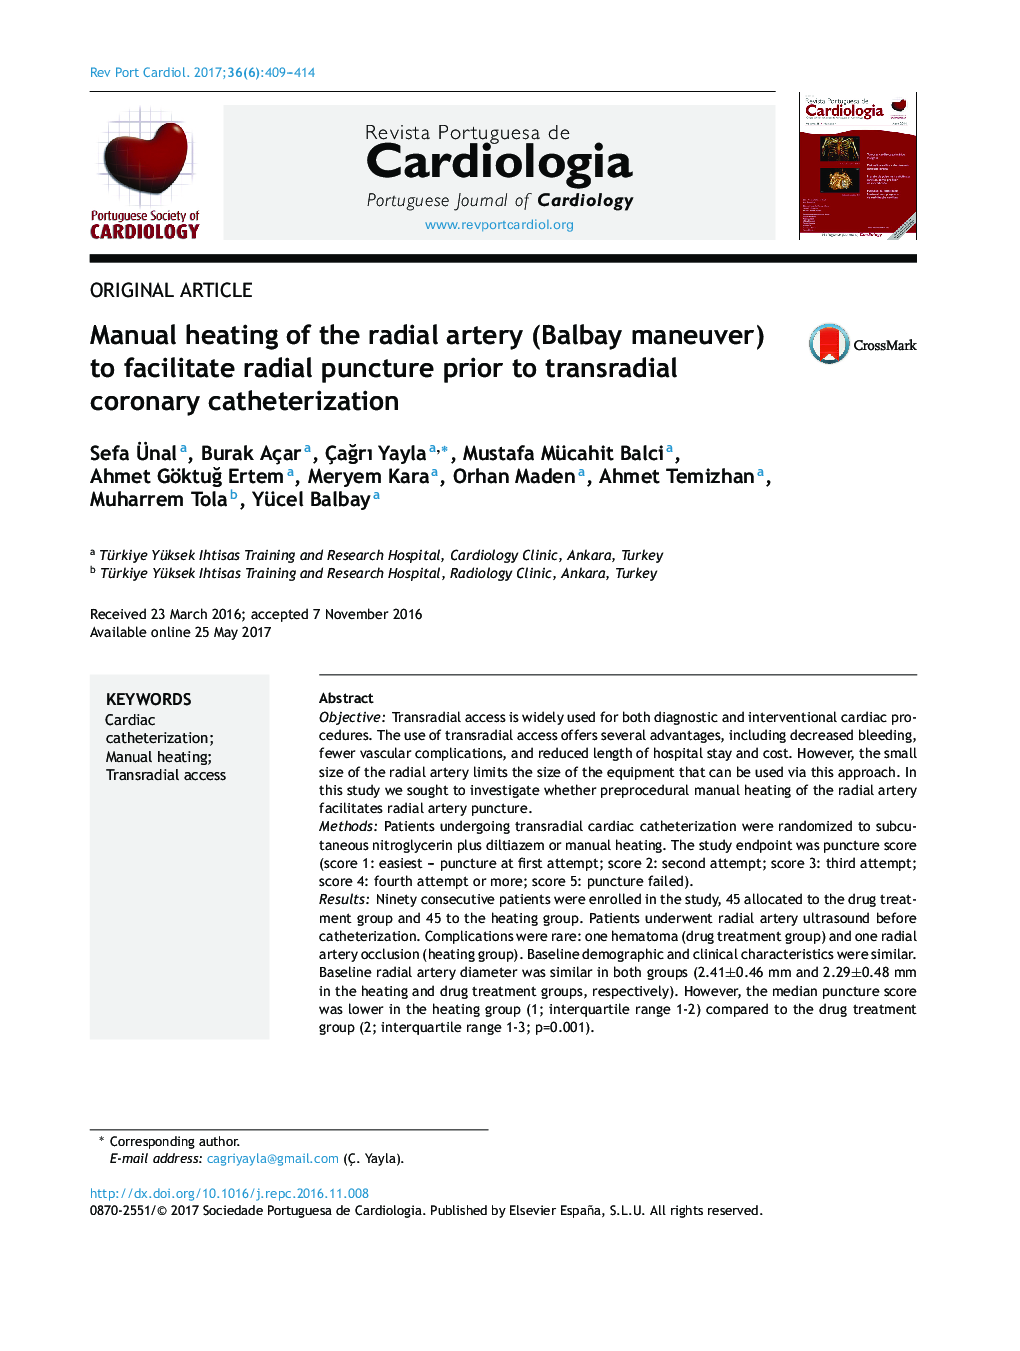 Manual heating of the radial artery (Balbay maneuver) to facilitate radial puncture prior to transradial coronary catheterization